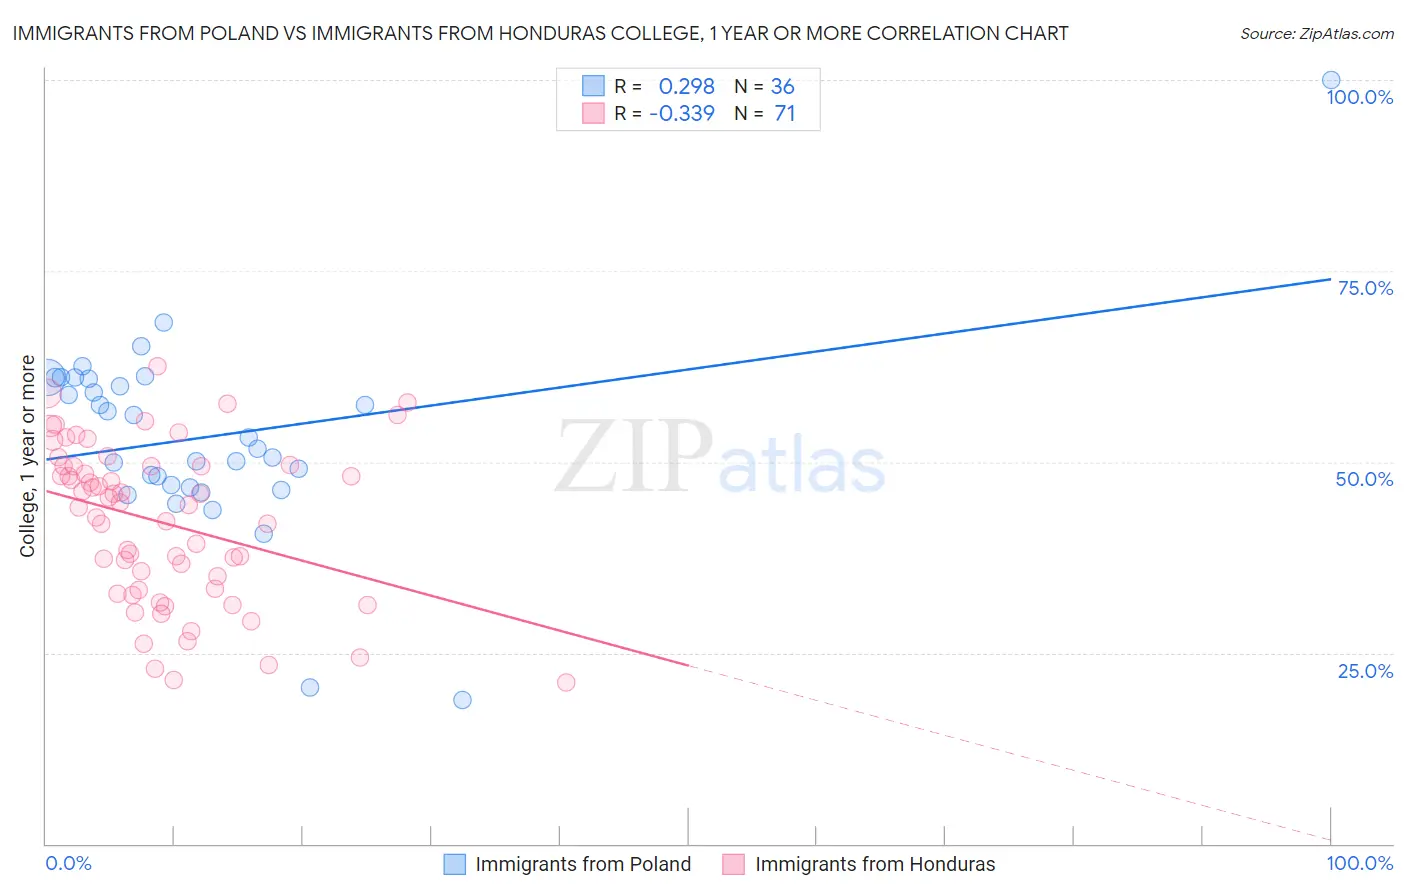 Immigrants from Poland vs Immigrants from Honduras College, 1 year or more